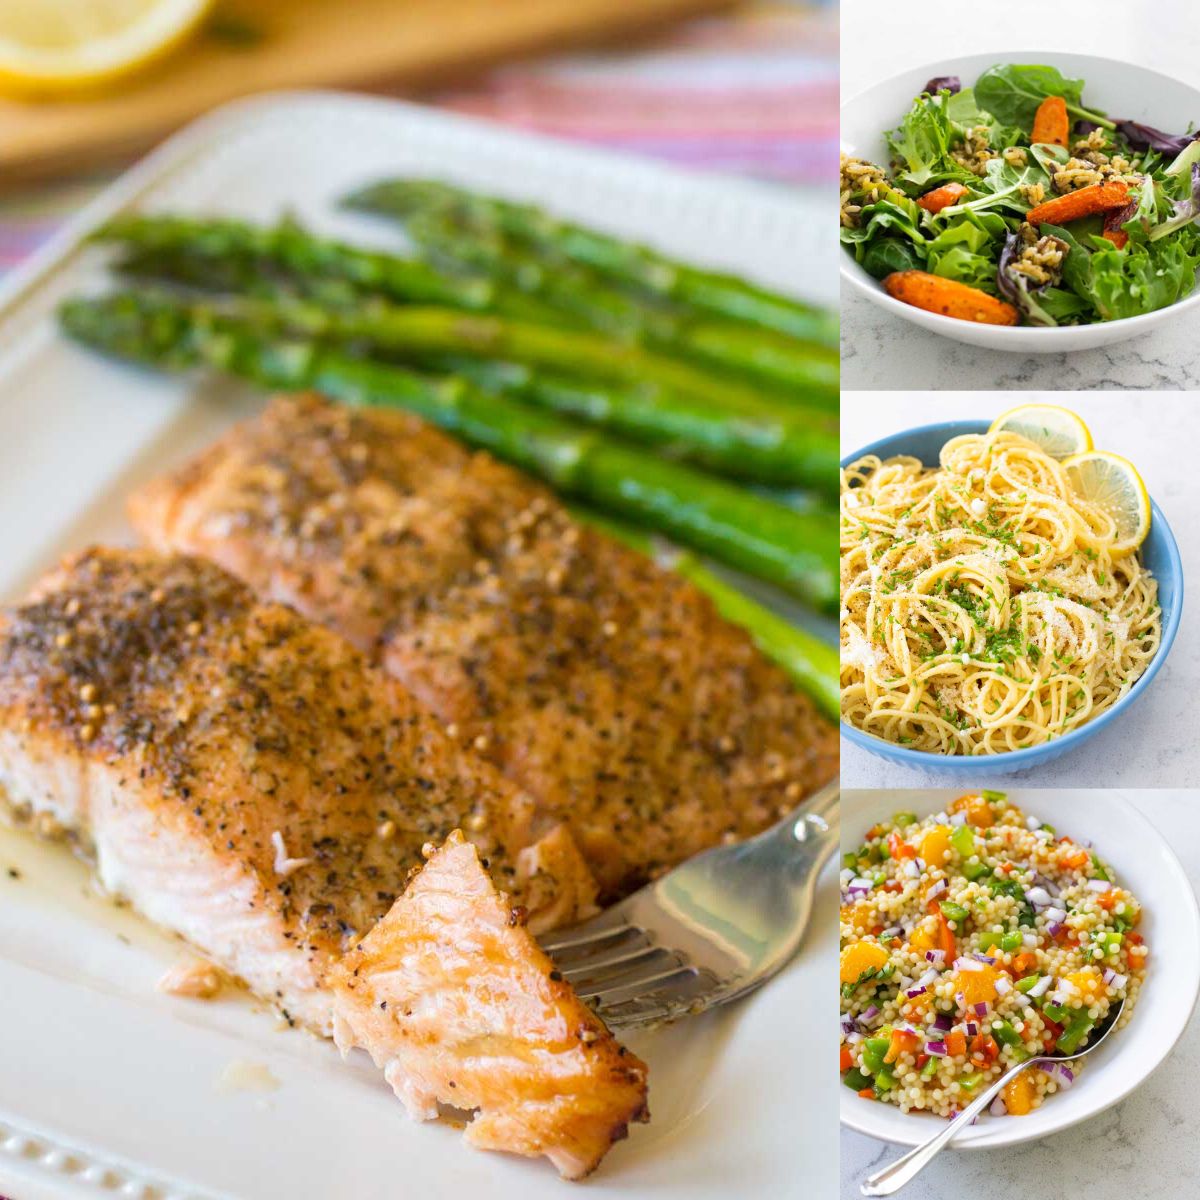 A plate of salmon and asparagus sits next to 3 salmon side dish options.